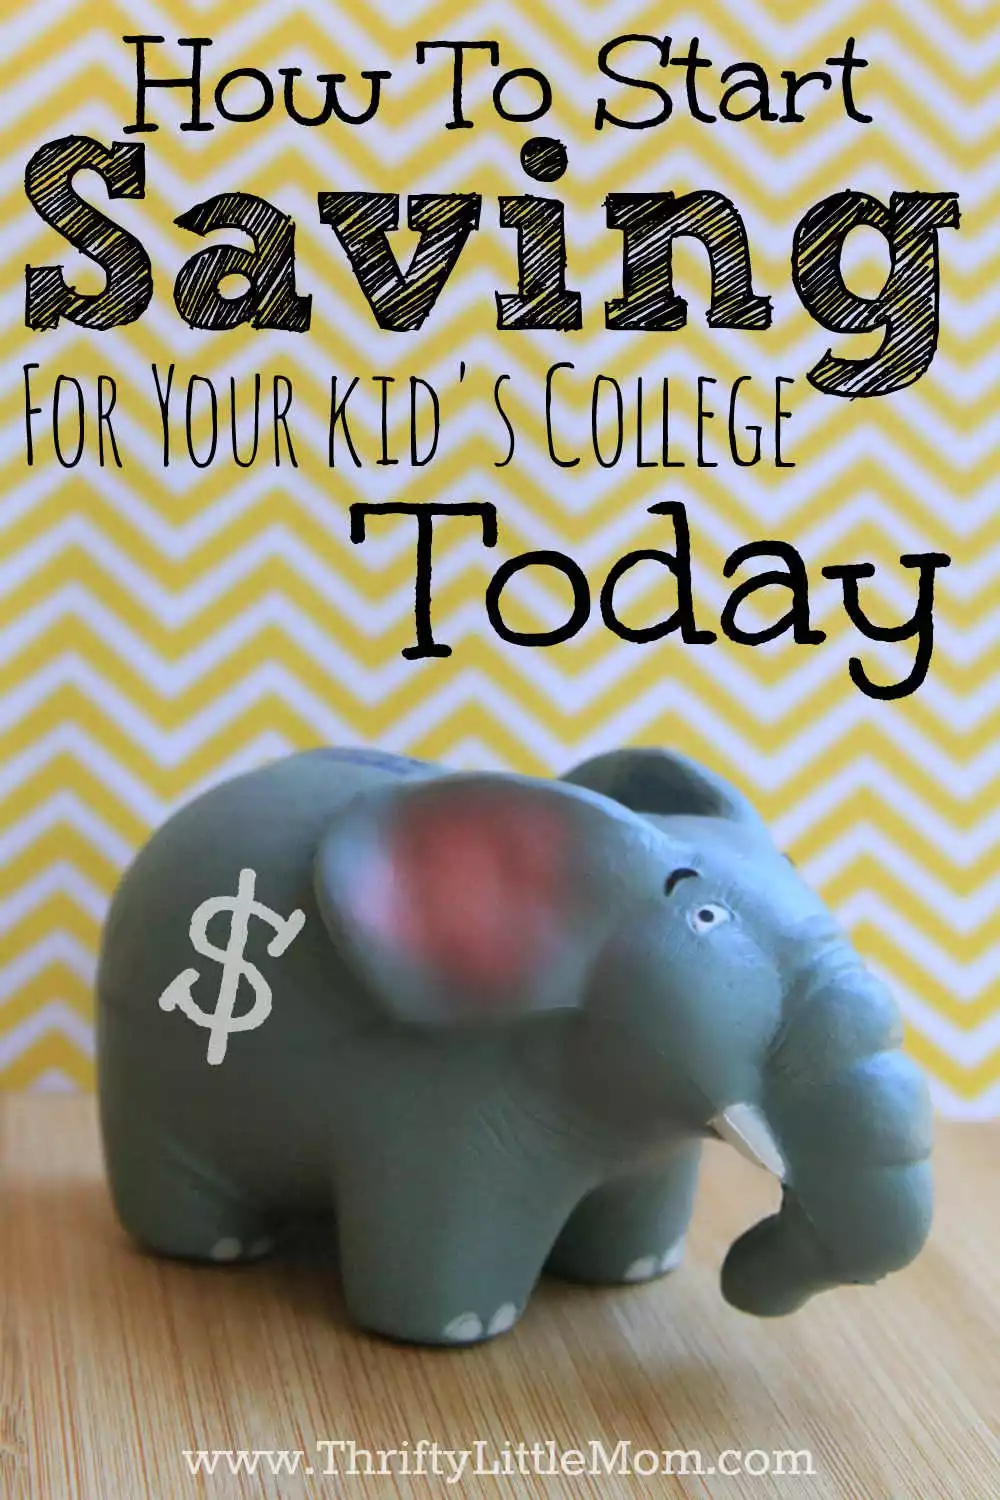 How To Start Saving For Your Kid's College Today